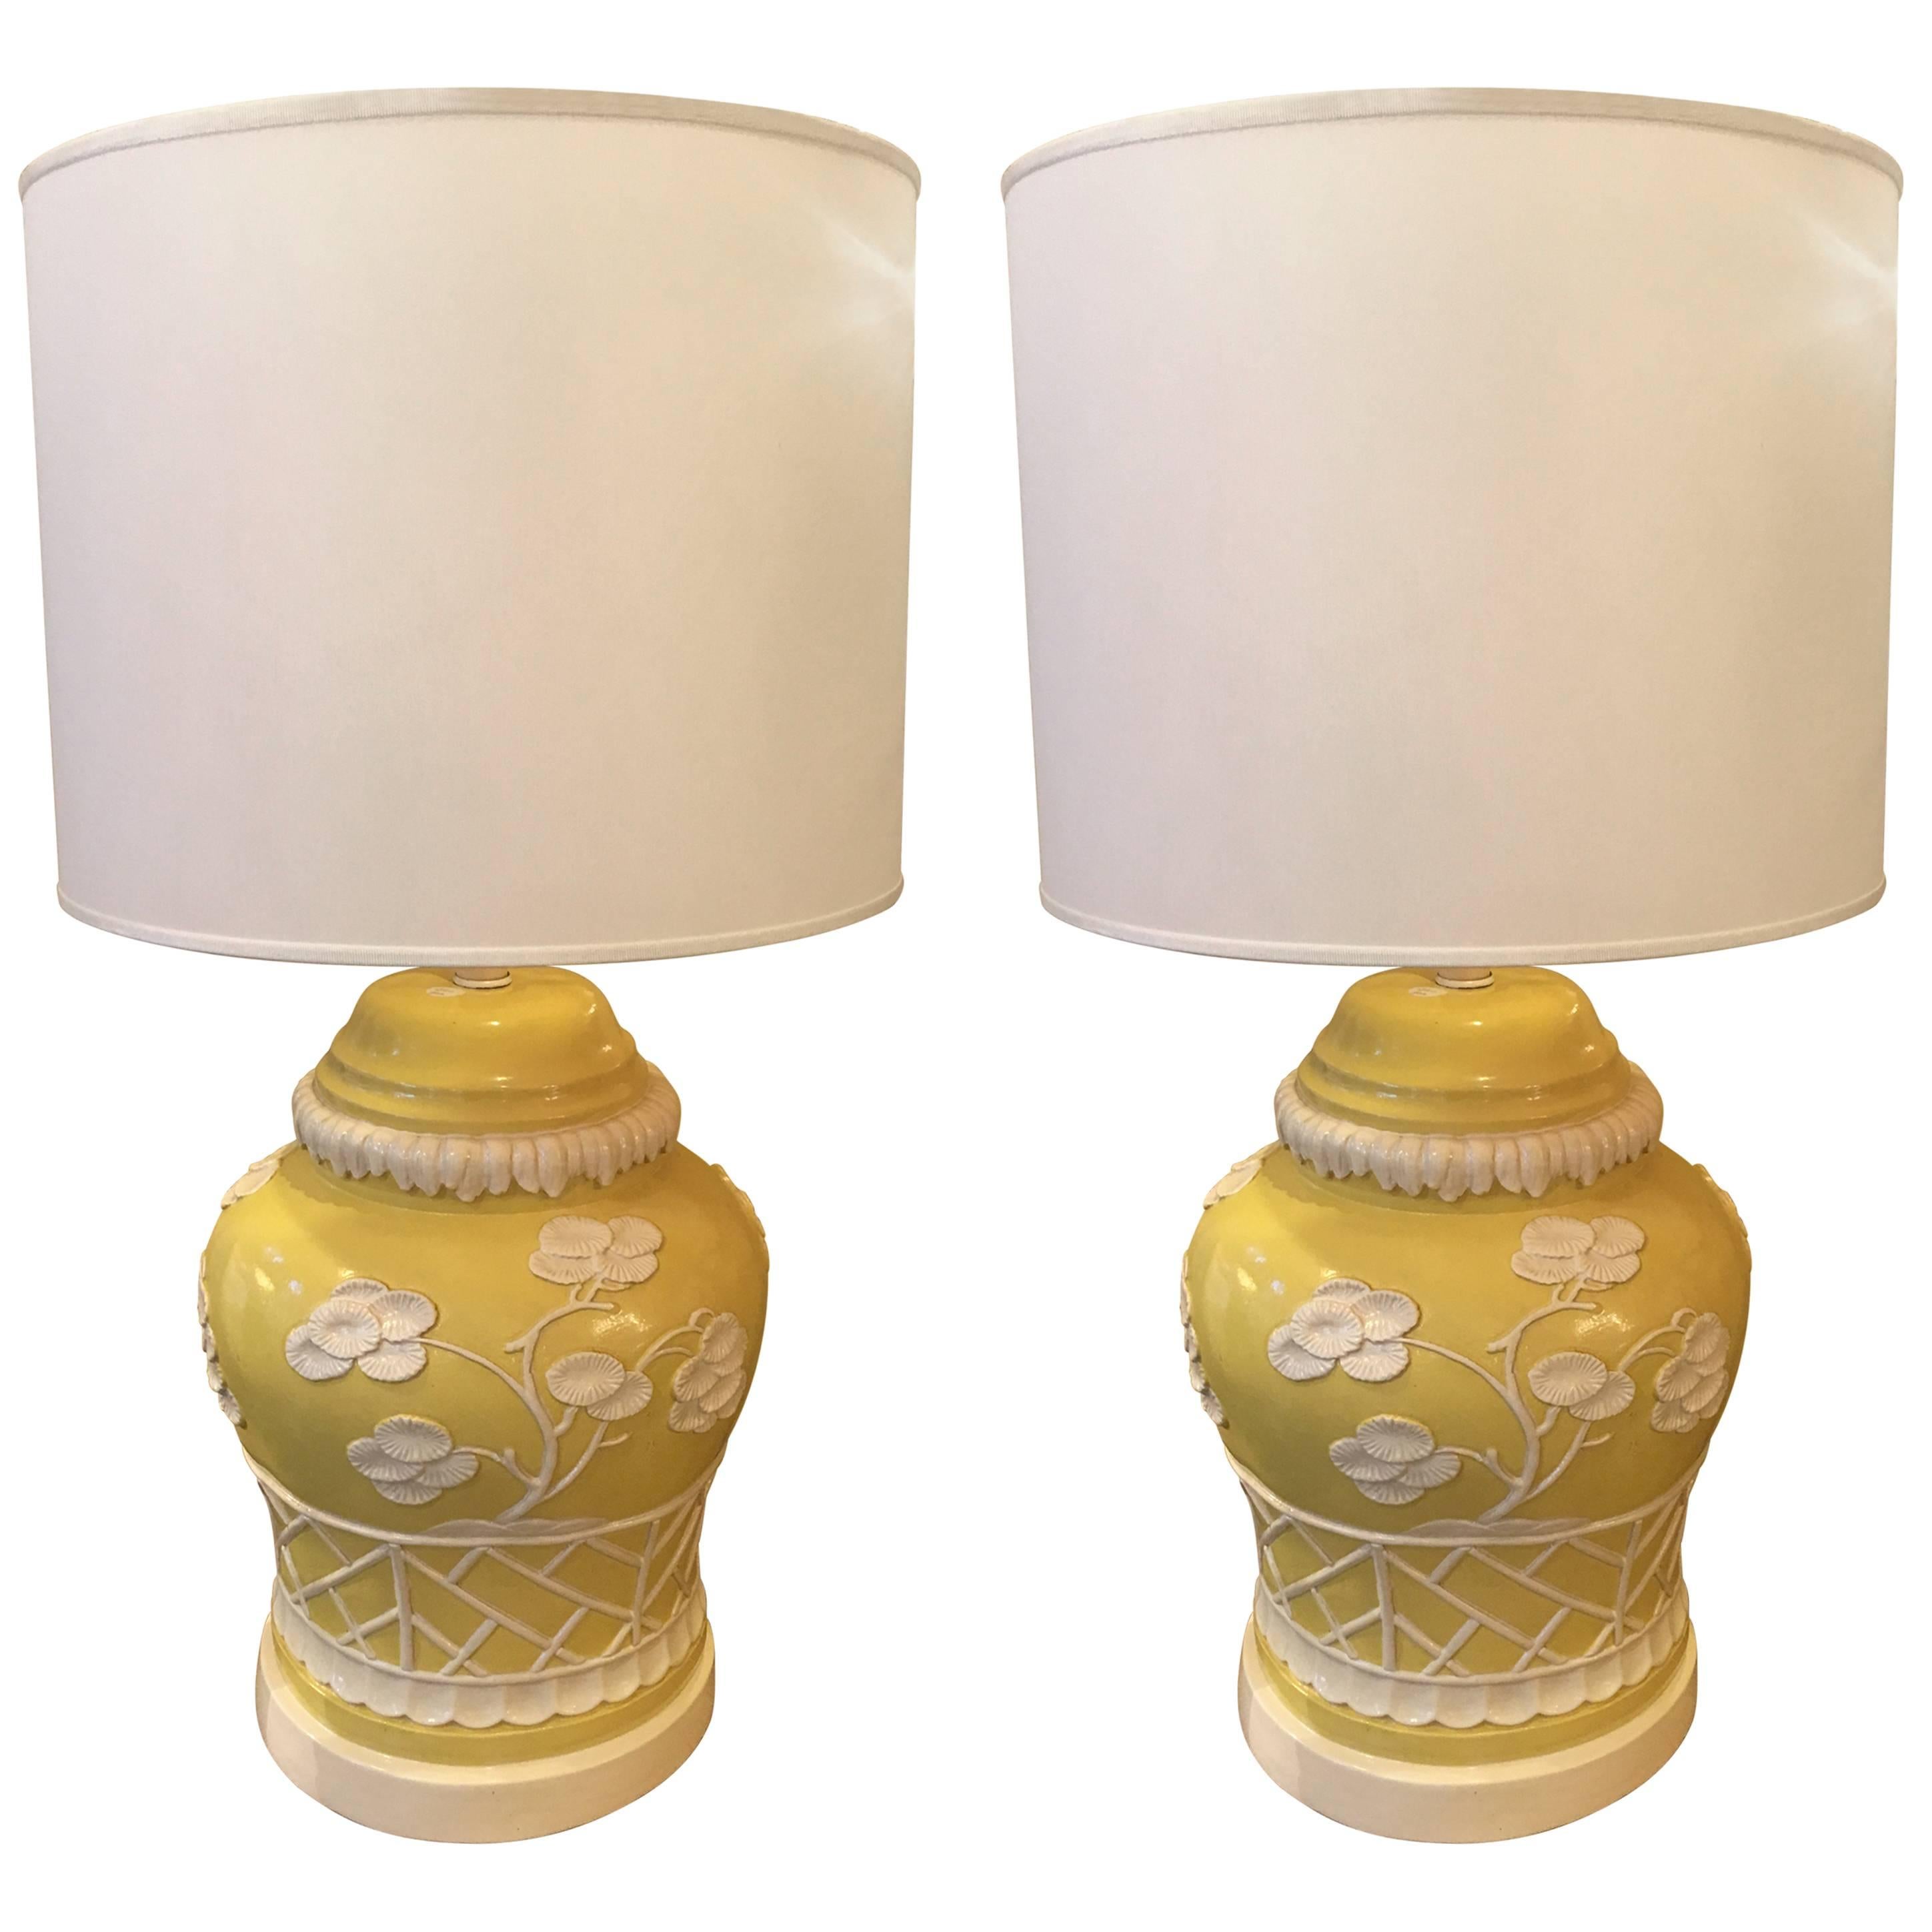 Pair of midcentury American yellow and white temple jar shape Chinese style lamps.